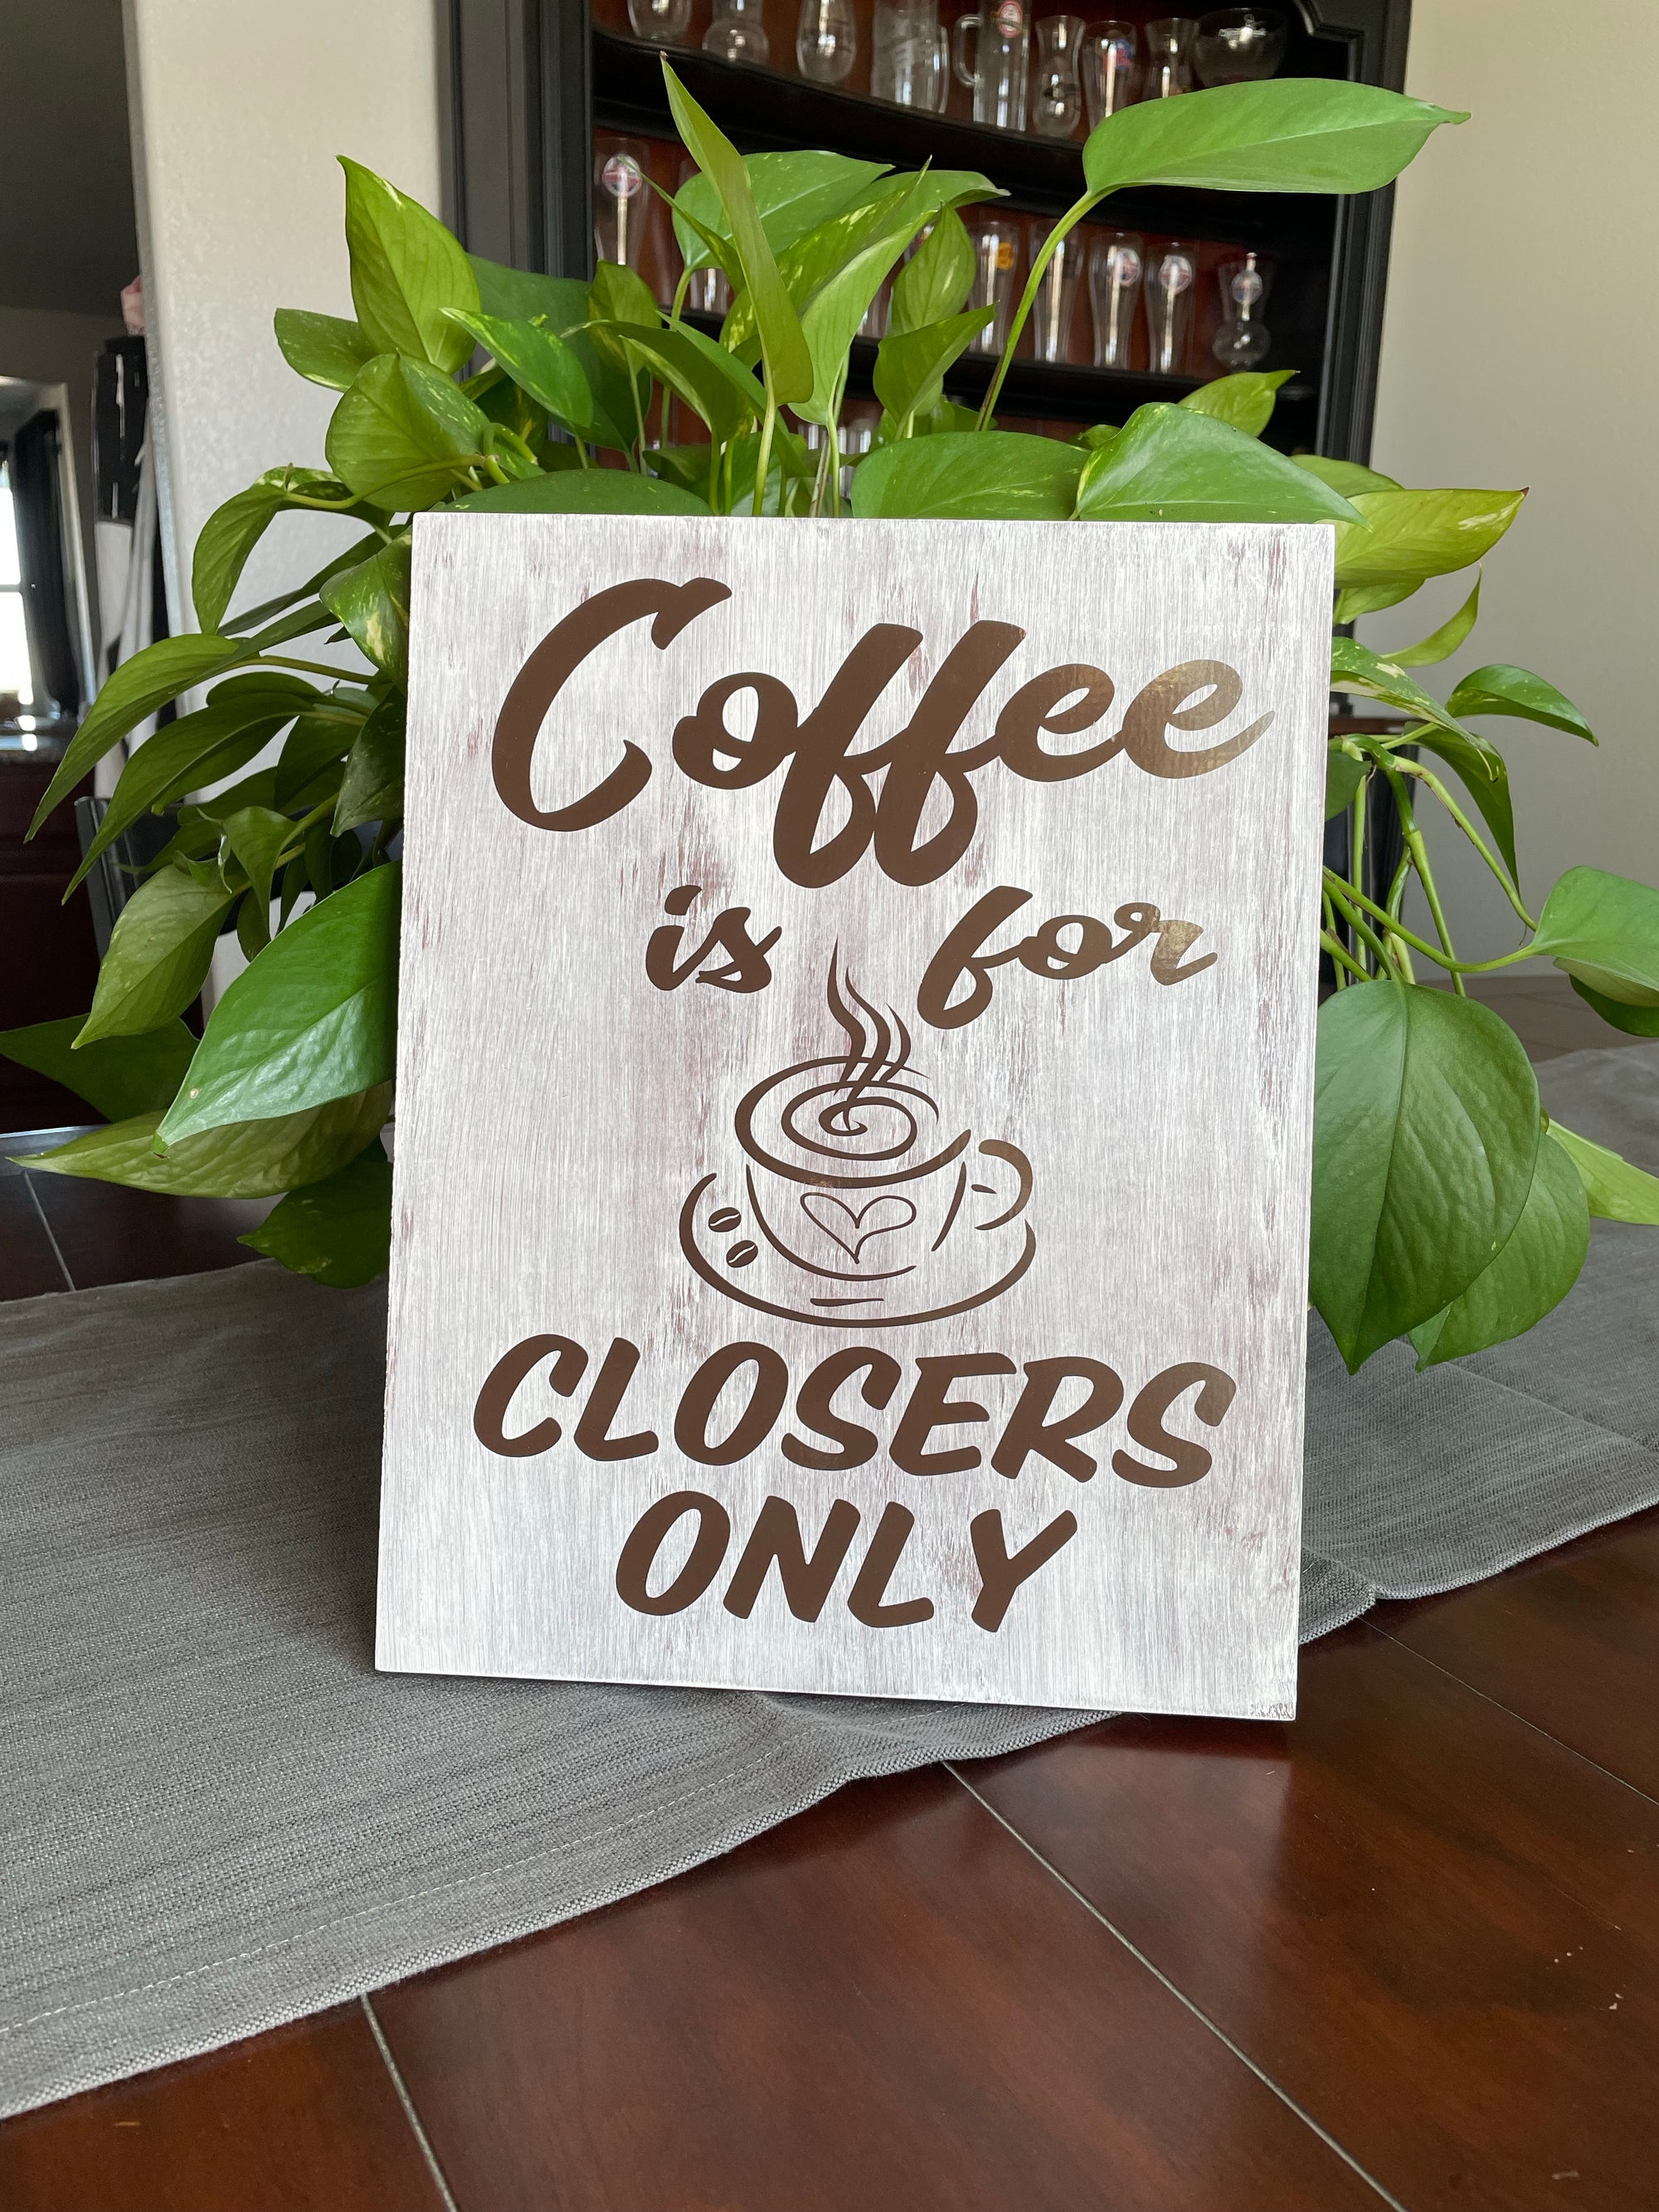 Coffee Is For Closers Only sign